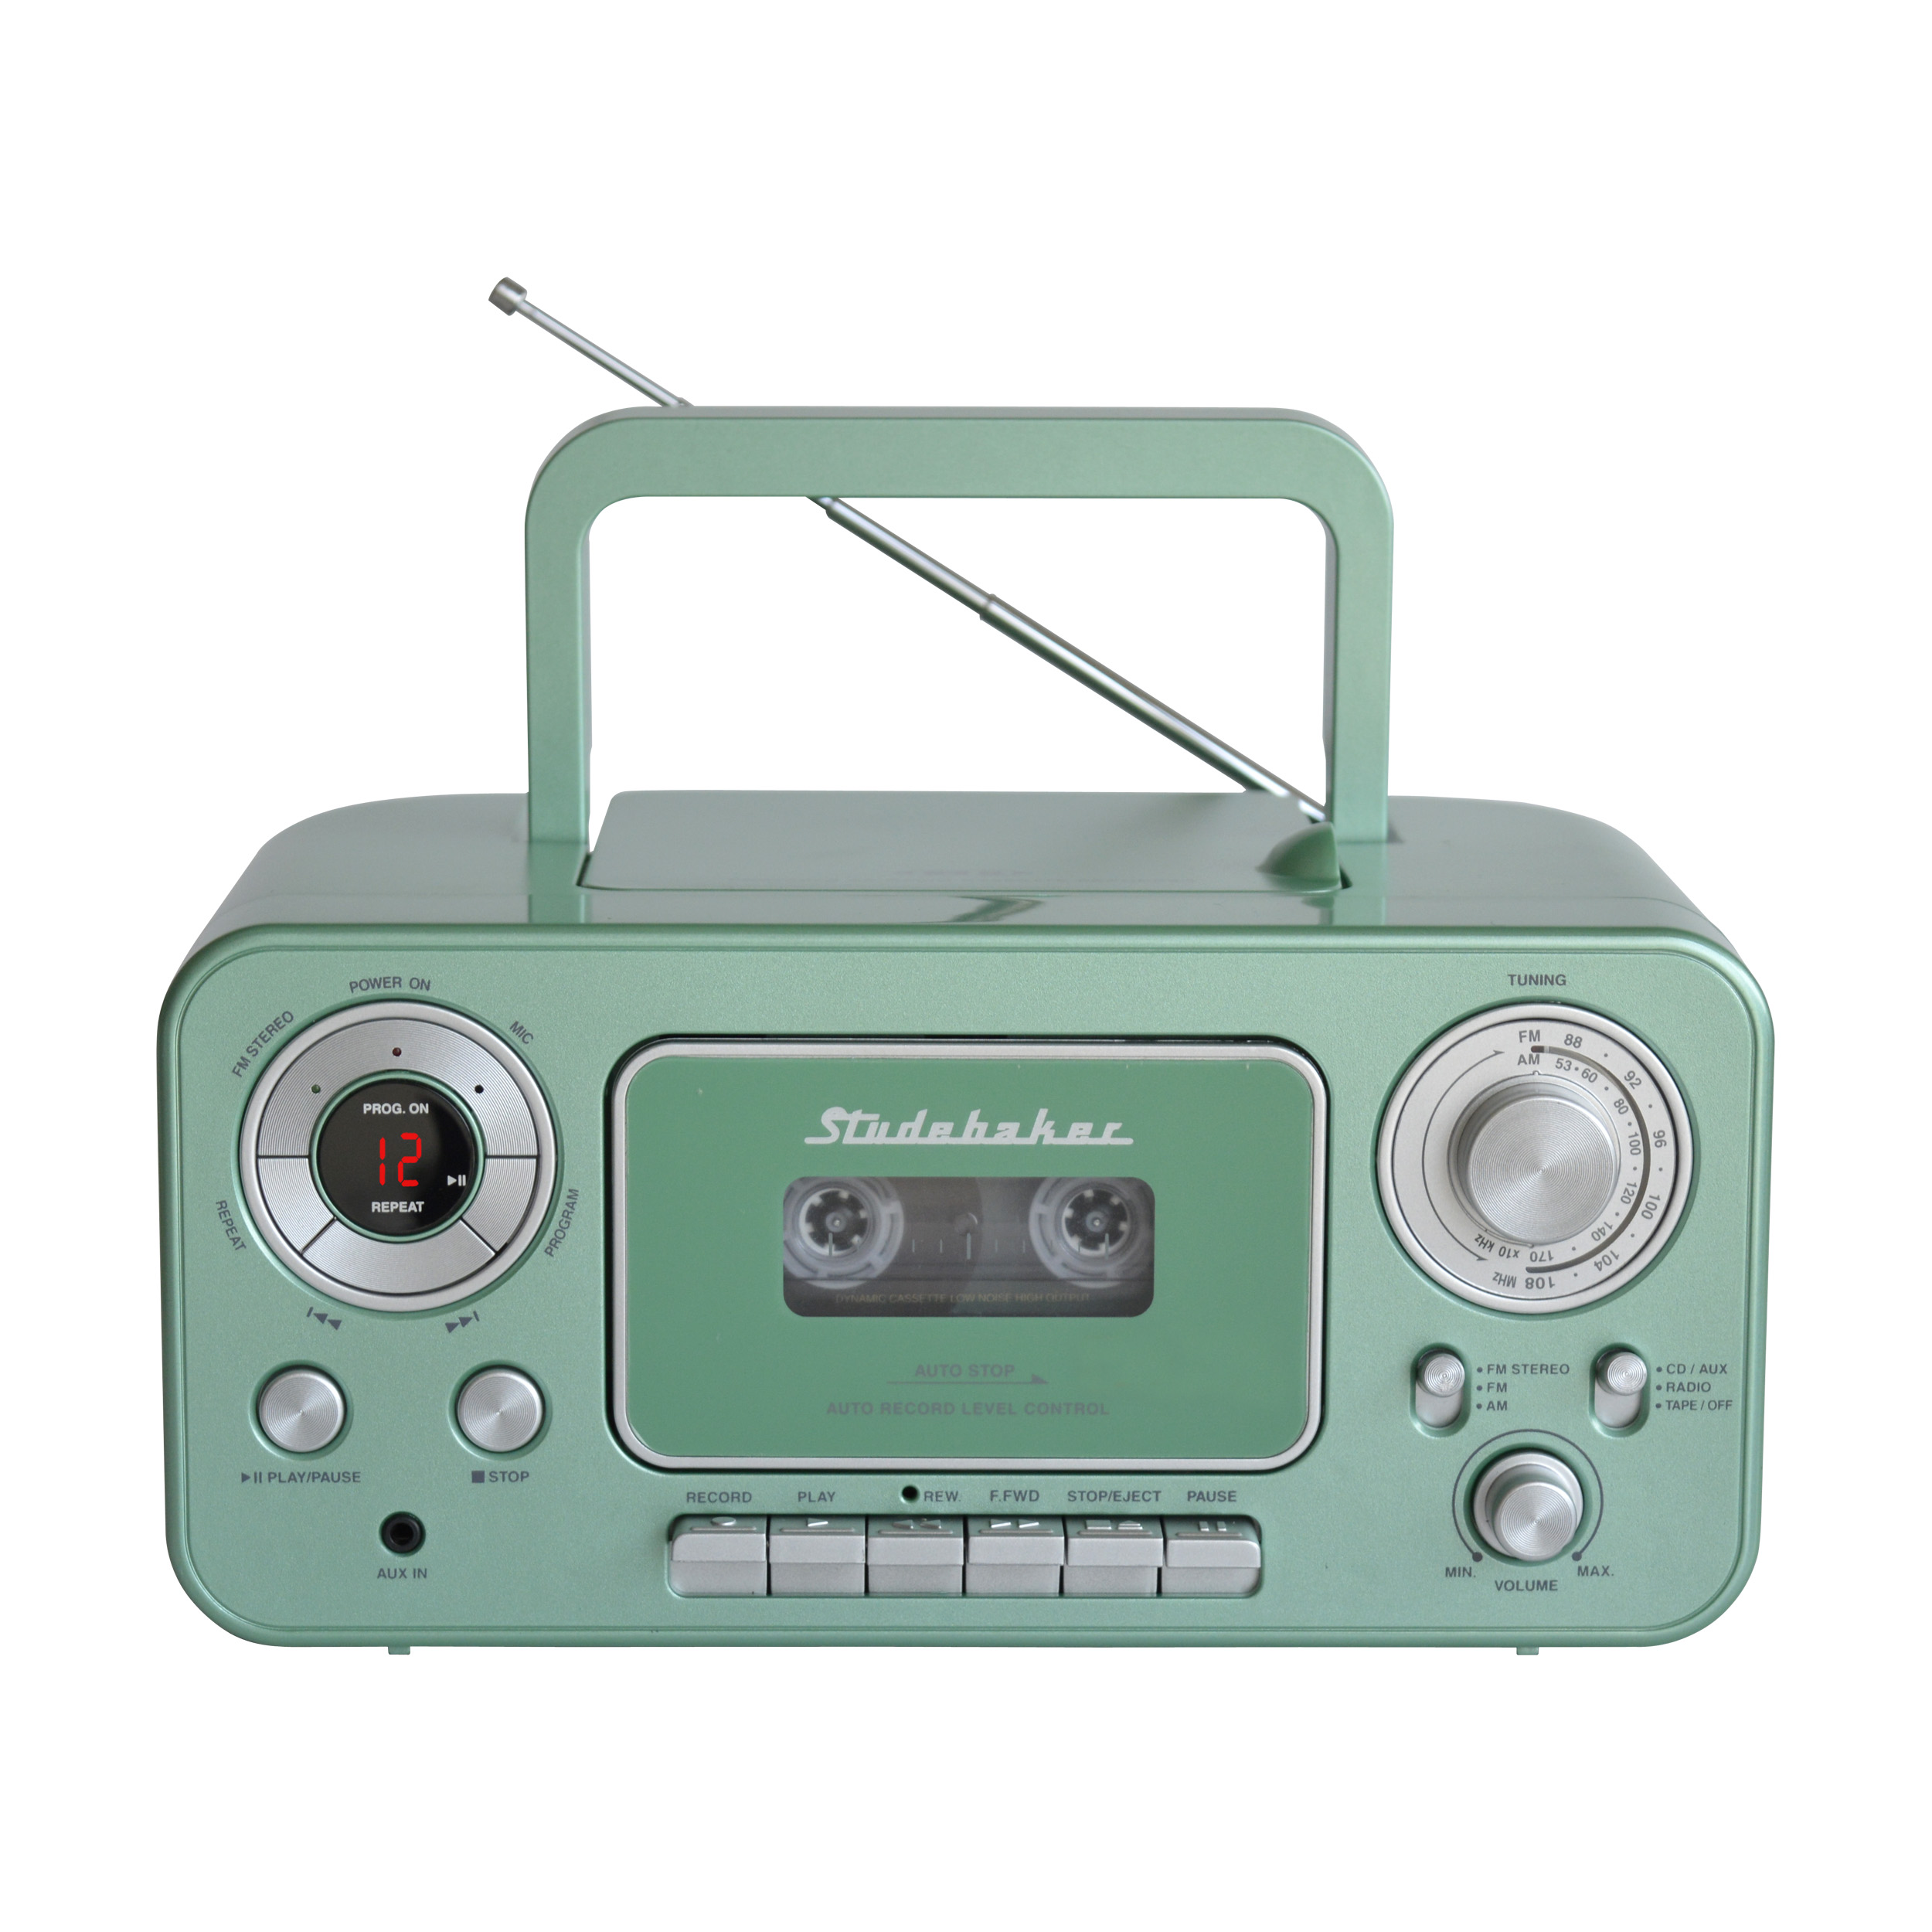 Portable Stereo CD Player with AM/FM Radio and Cassette Player/Recorder - image 2 of 5